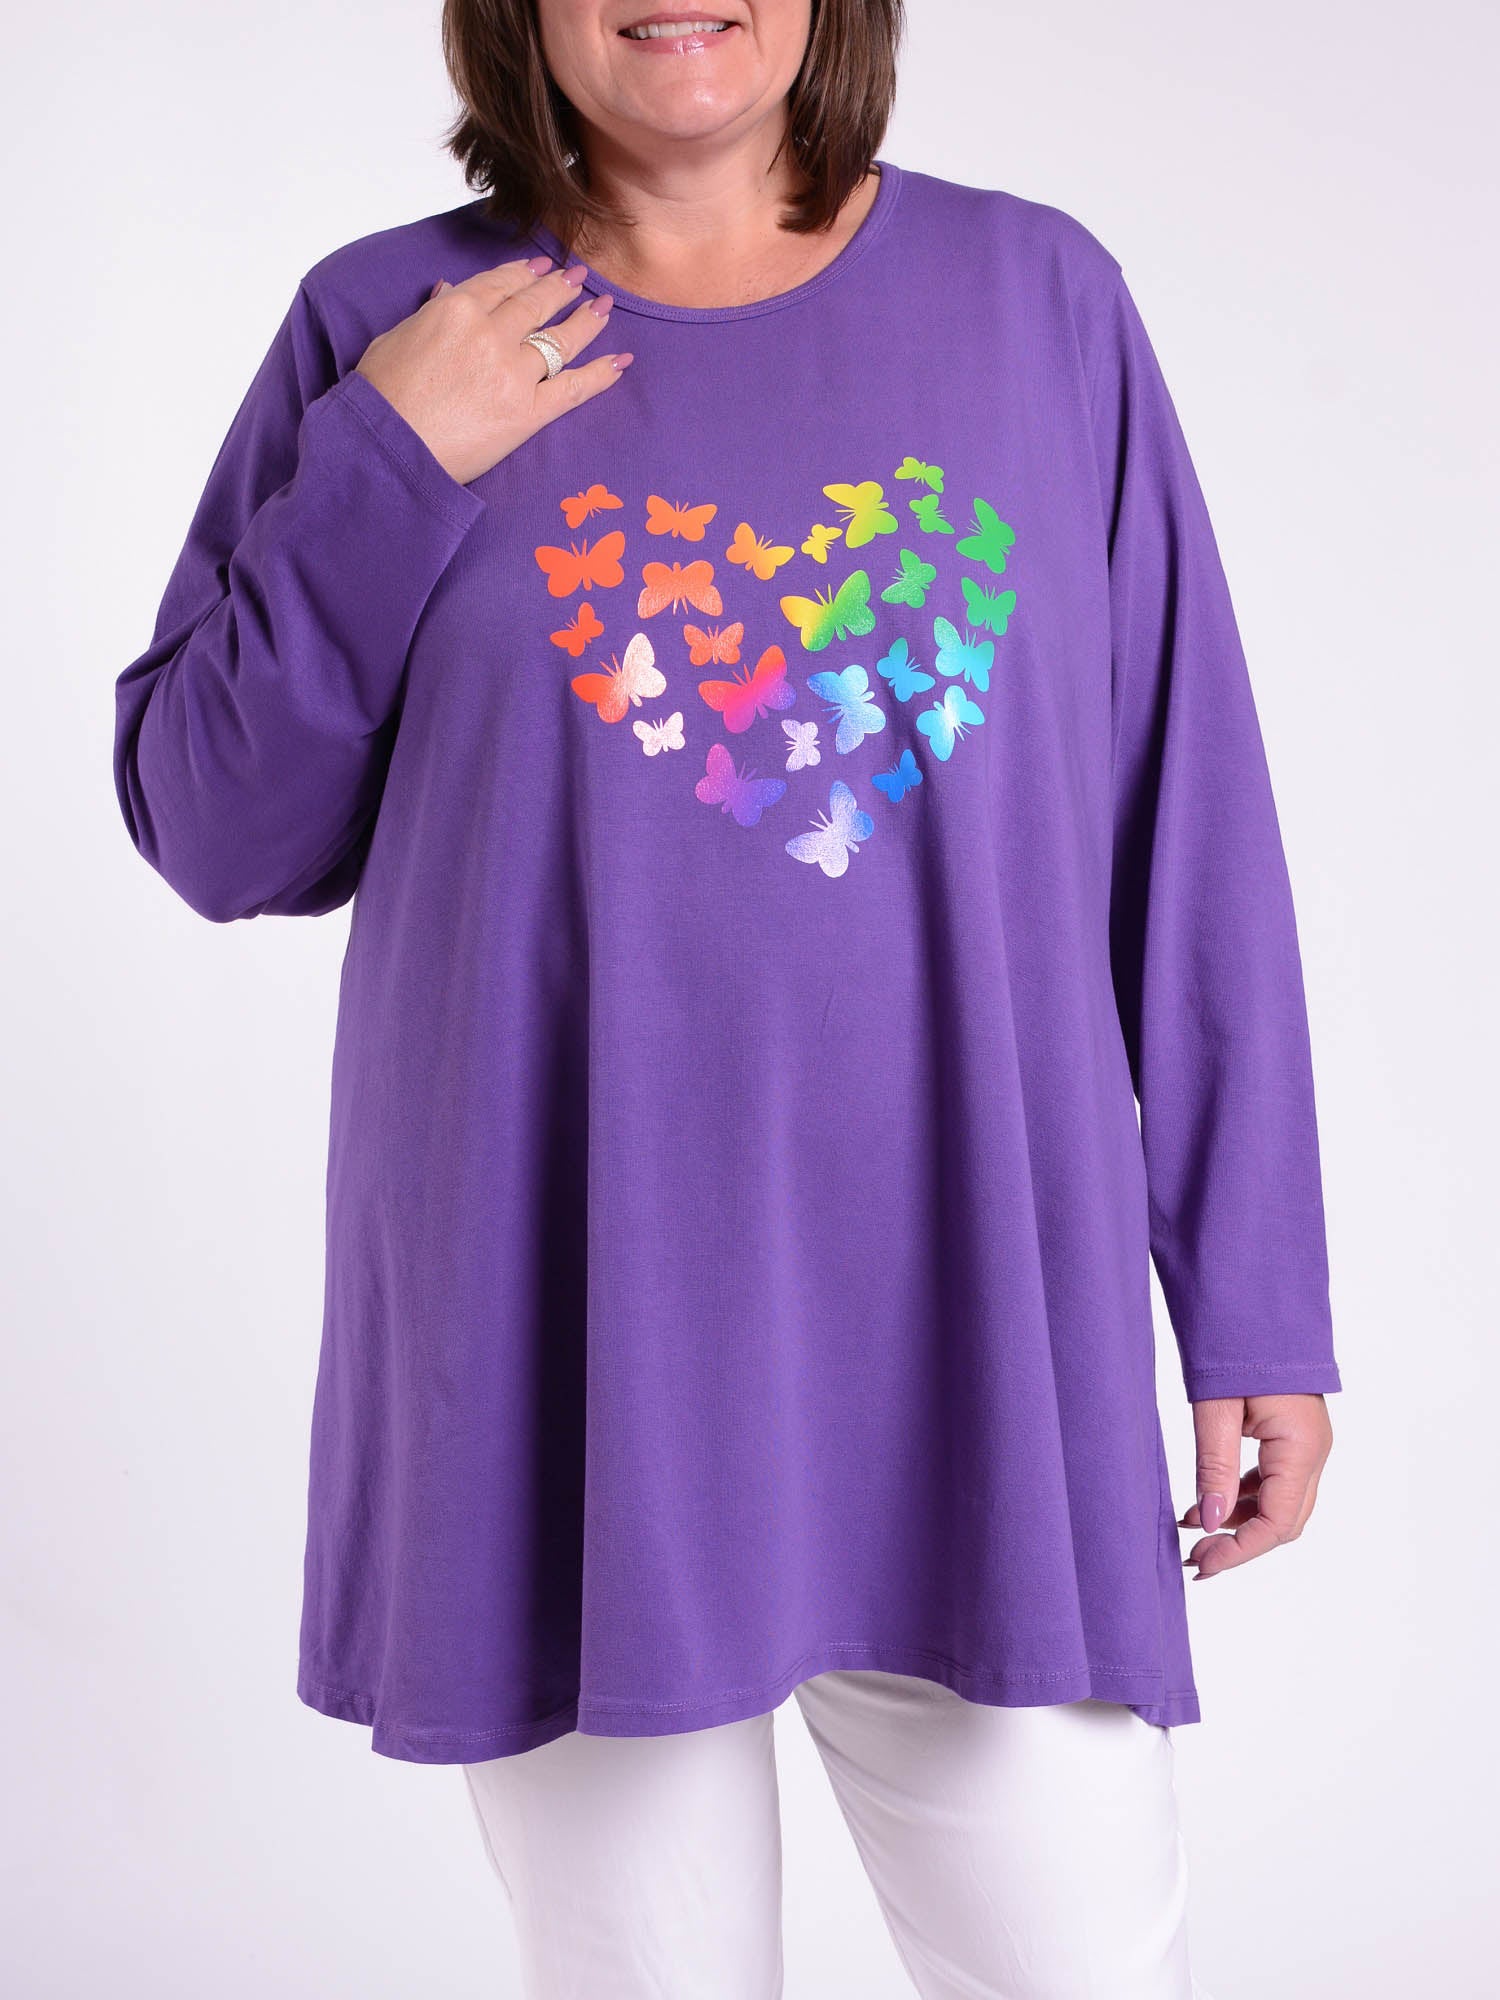 Cotton Swing Top Round Neck Long Sleeve - 20516 BUTTERFLIES, Tops & Shirts, Pure Plus Clothing, Lagenlook Clothing, Plus Size Fashion, Over 50 Fashion